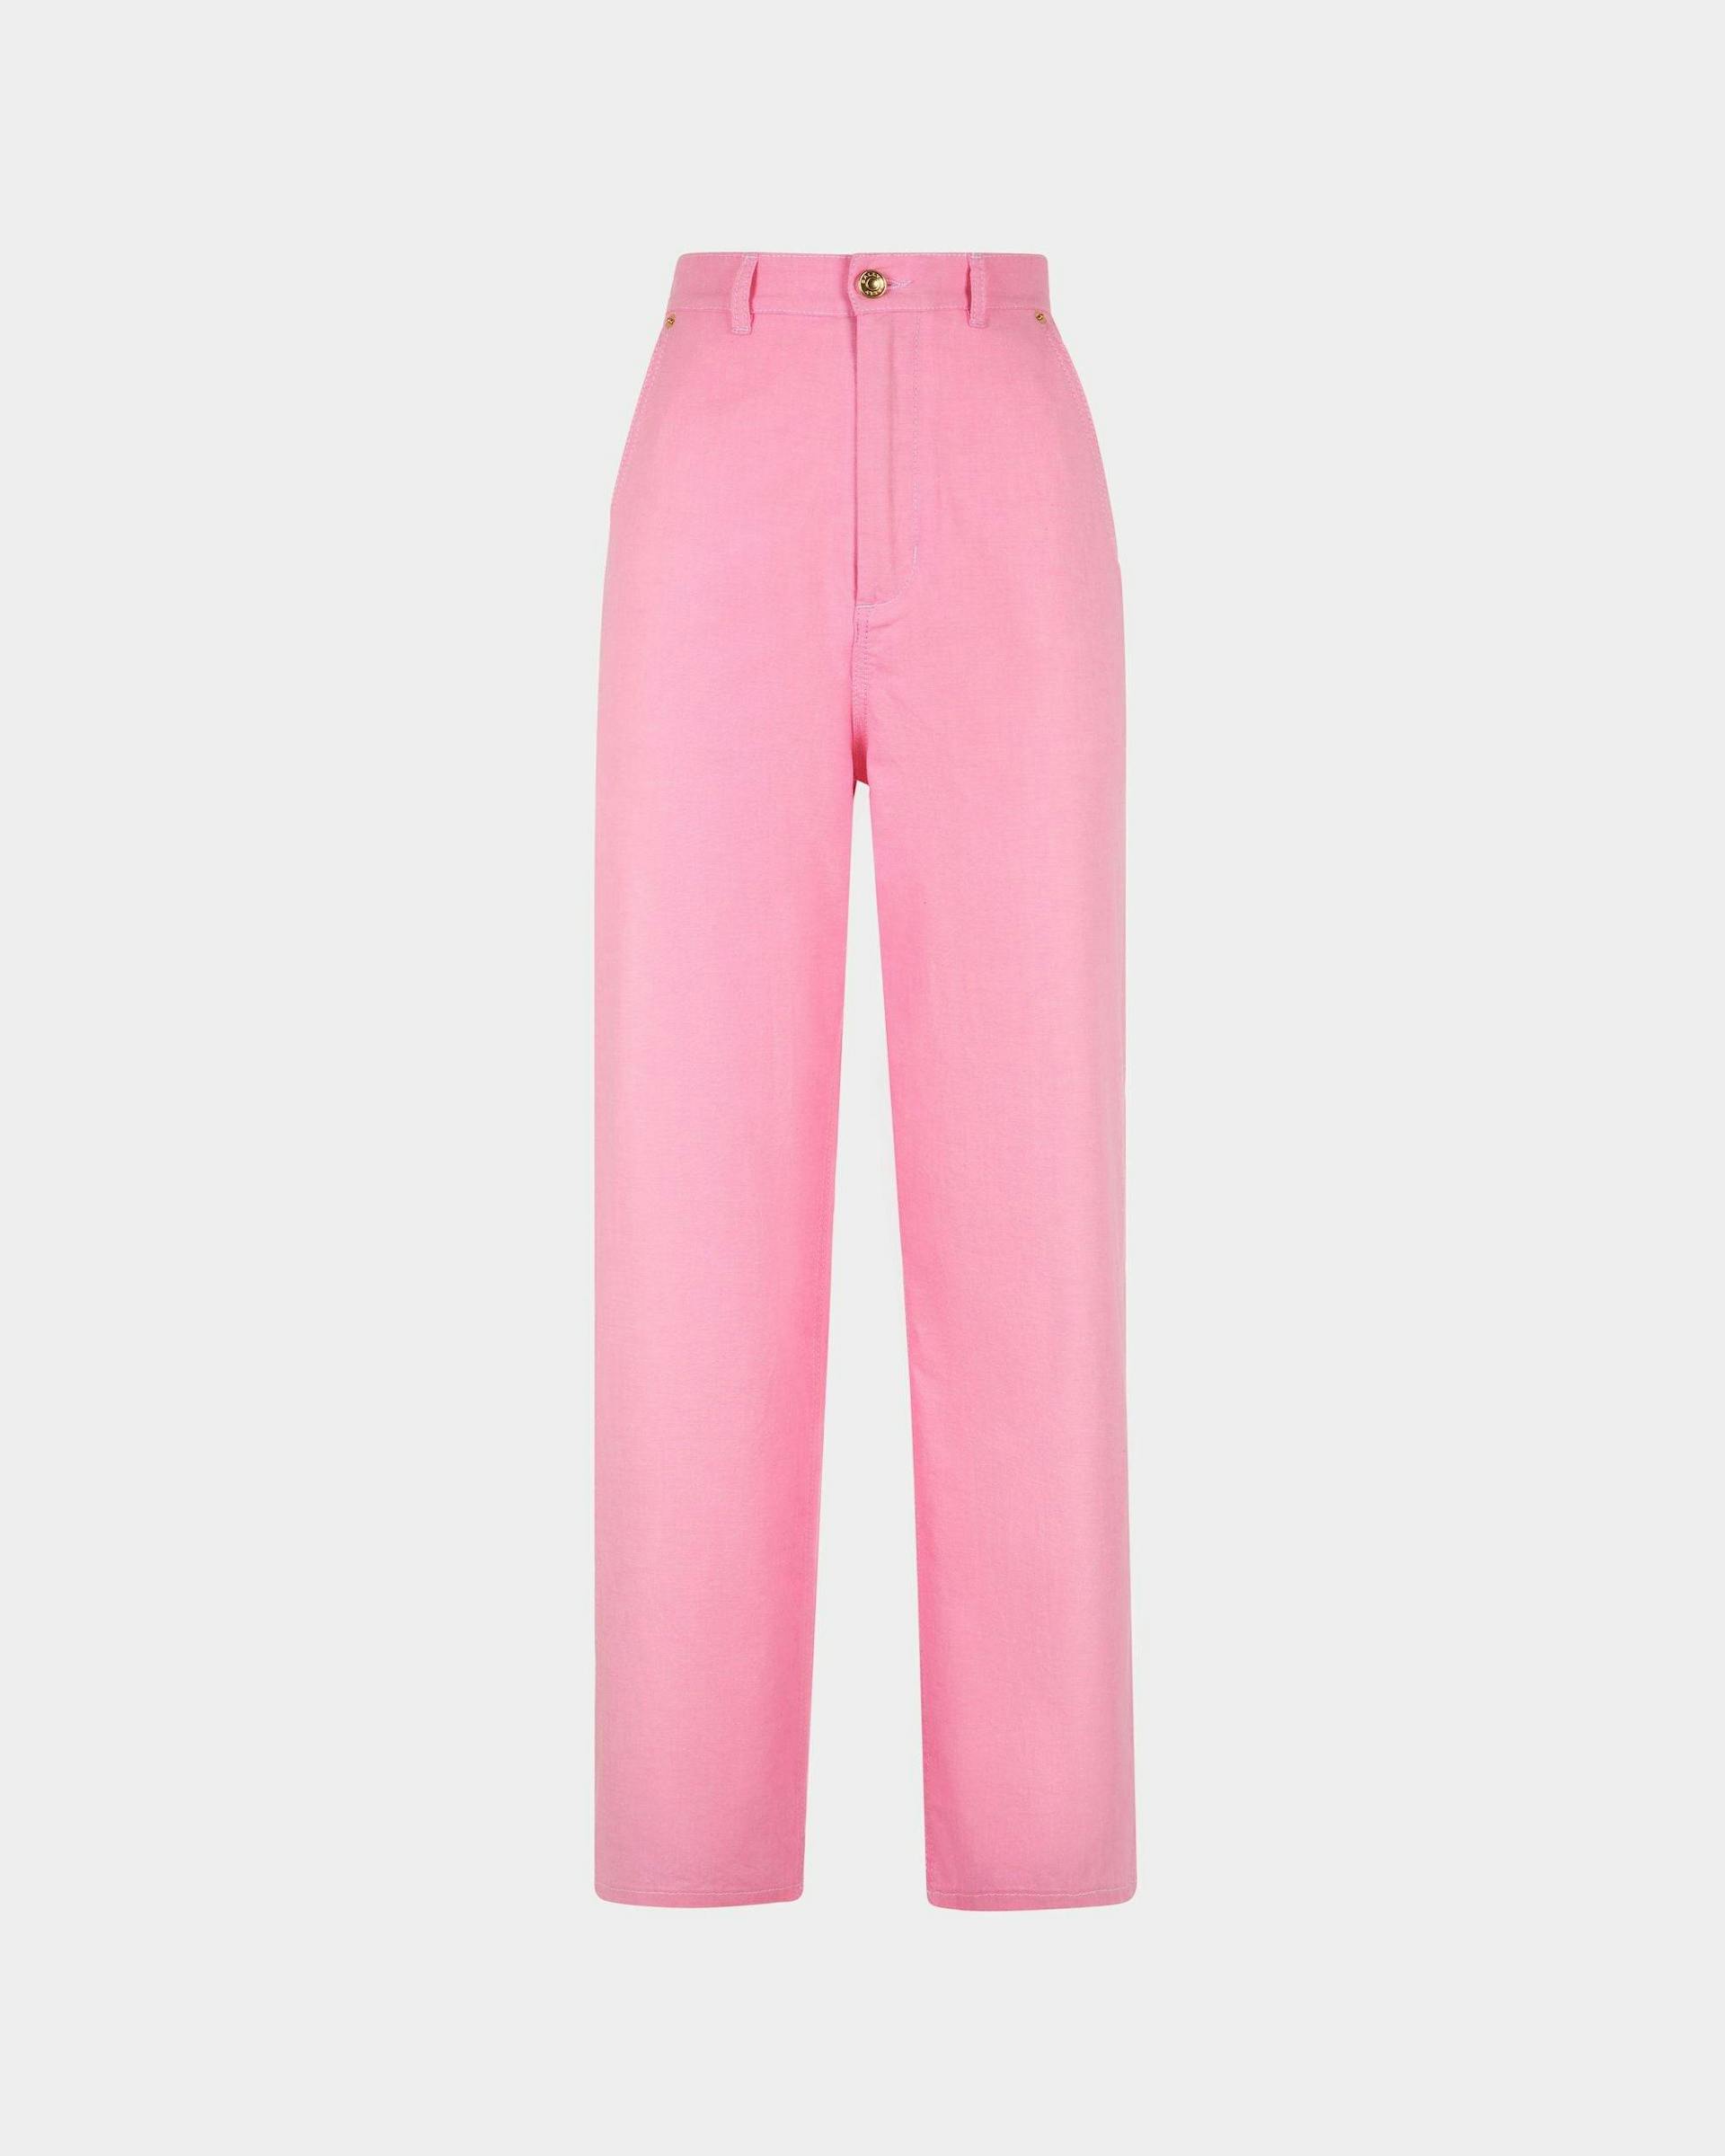 Women's Pants in Pink Cotton | Bally | Still Life Front